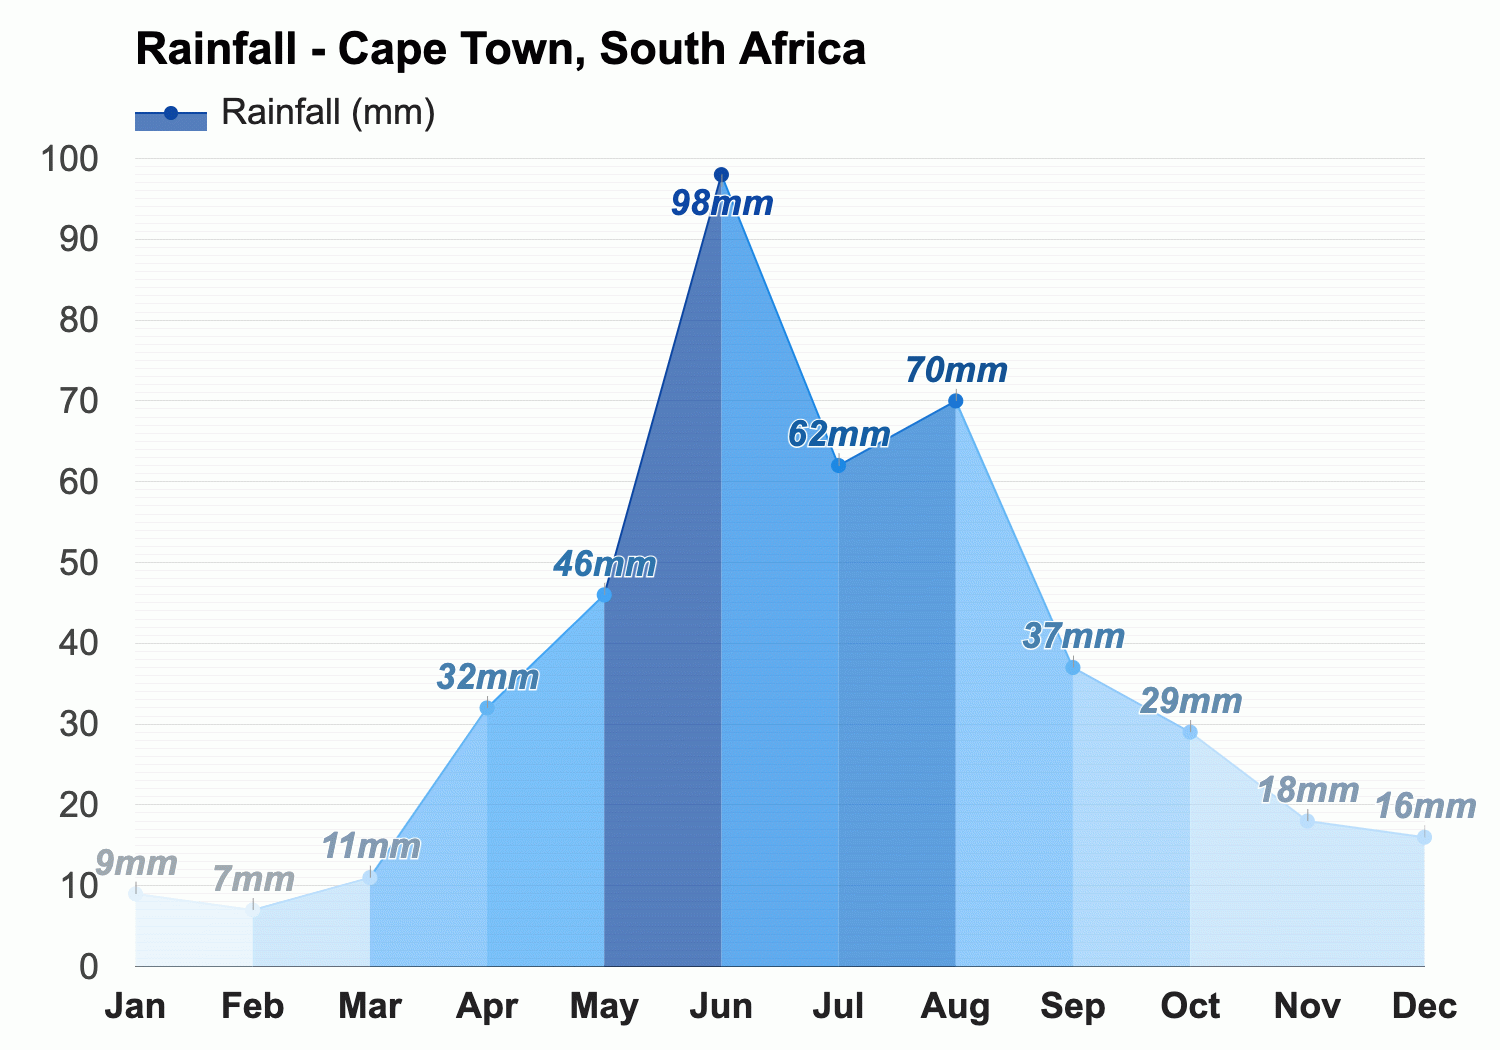 Cape Town, South Africa - December weather forecast and climate information  | Weather Atlas